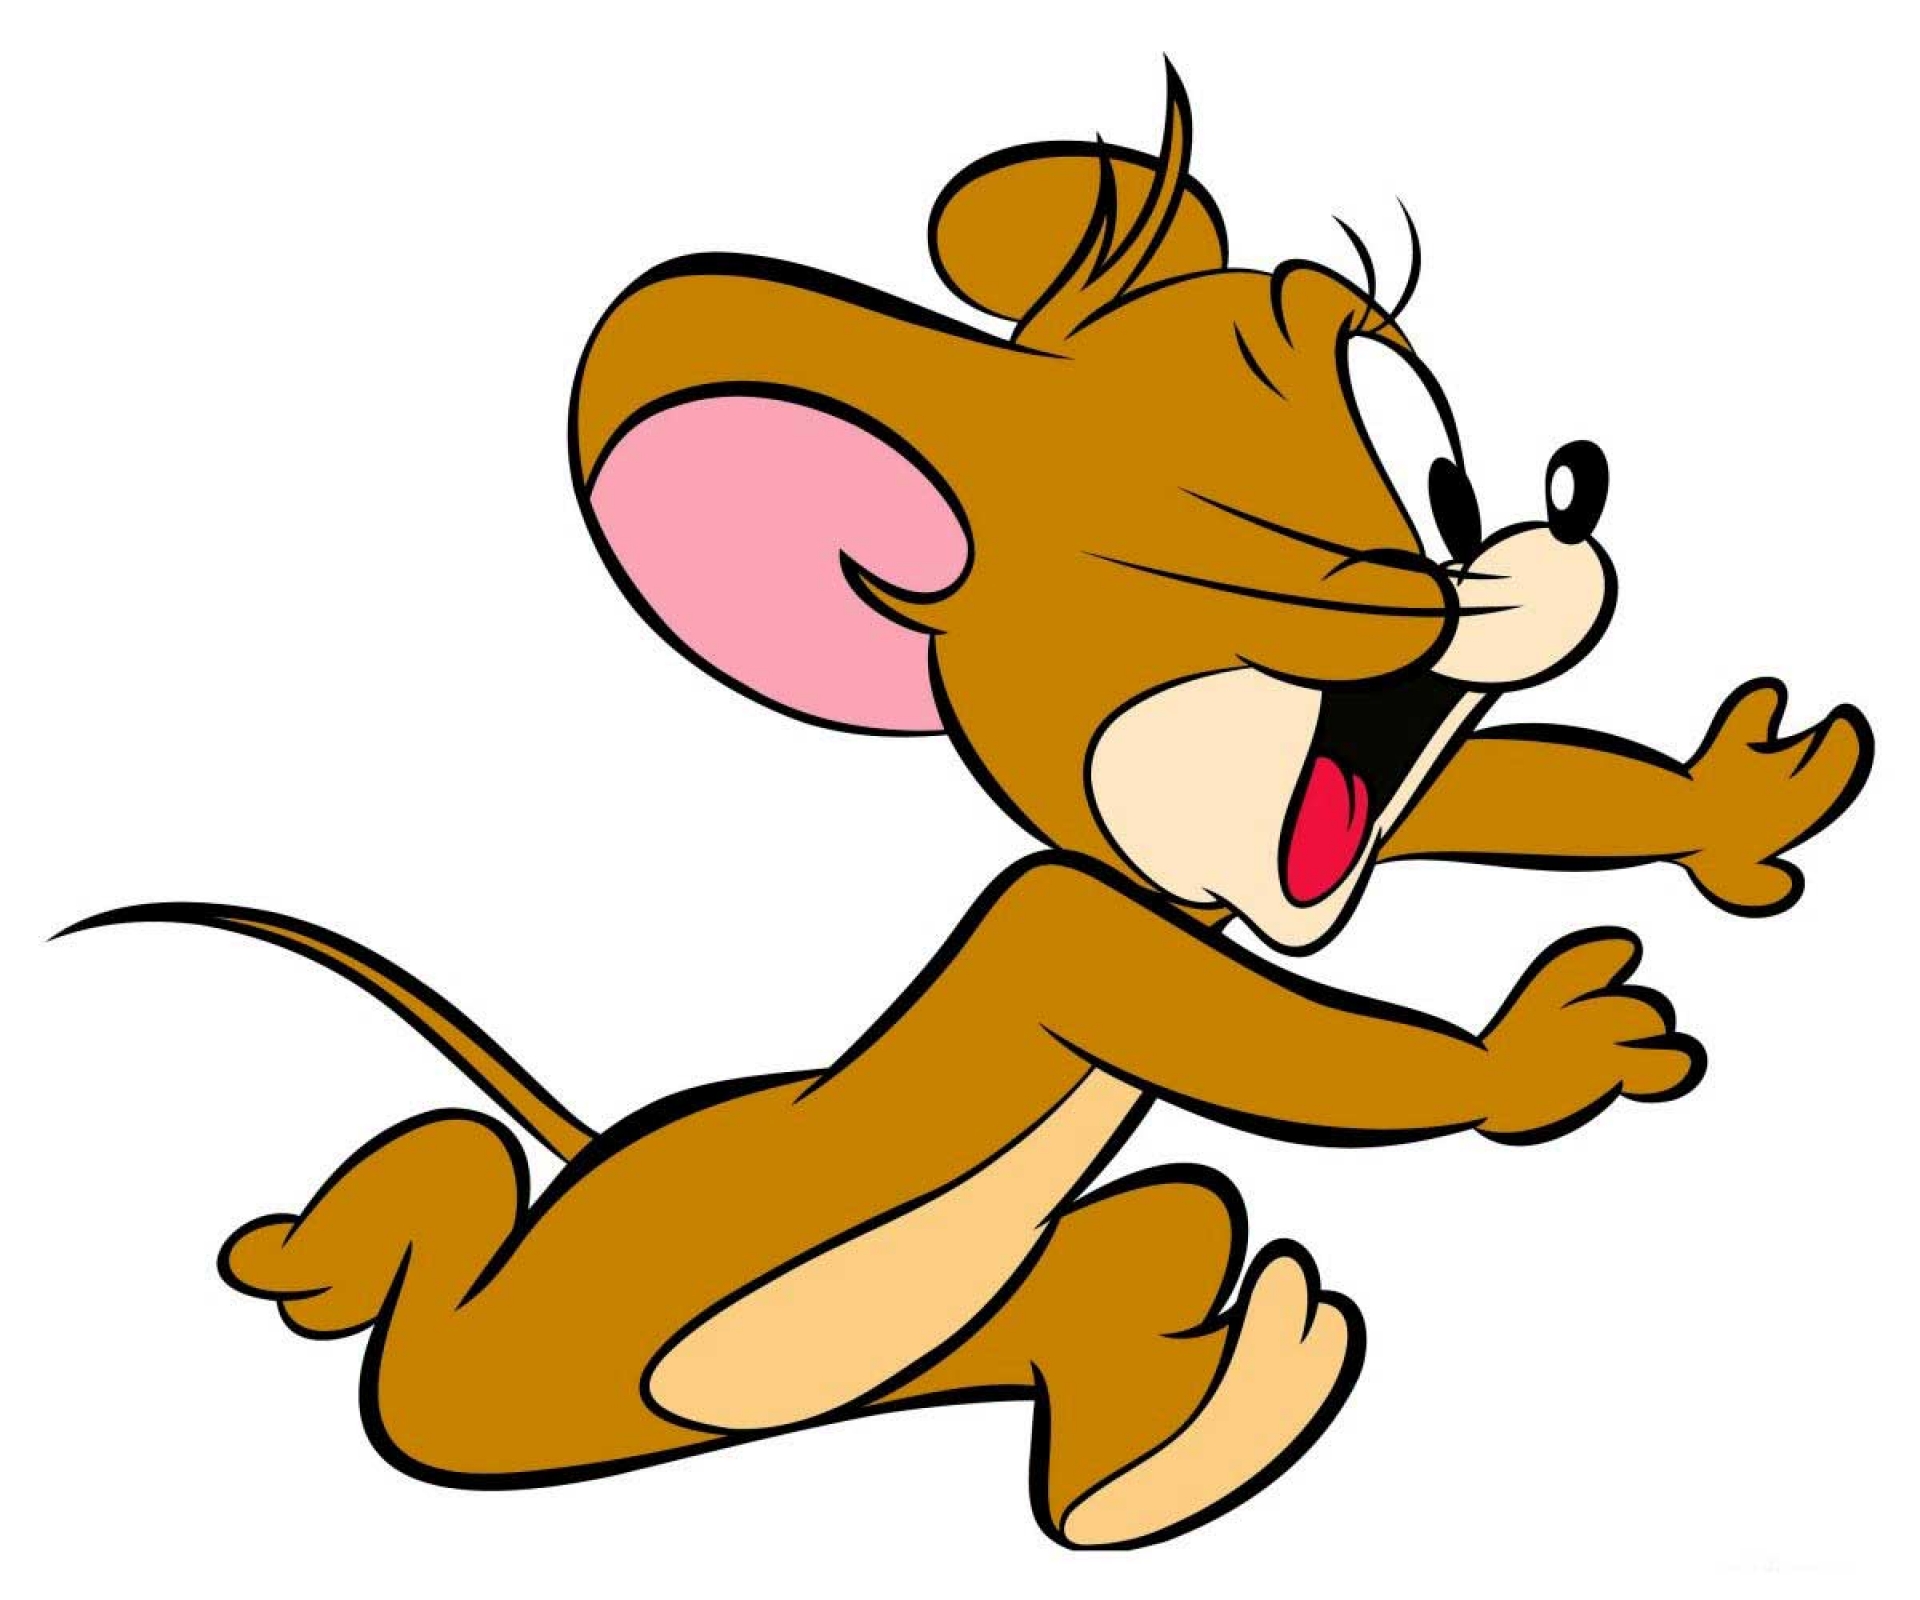 Pictures Of Cartoon Mice | Free Download Clip Art | Free Clip Art ...